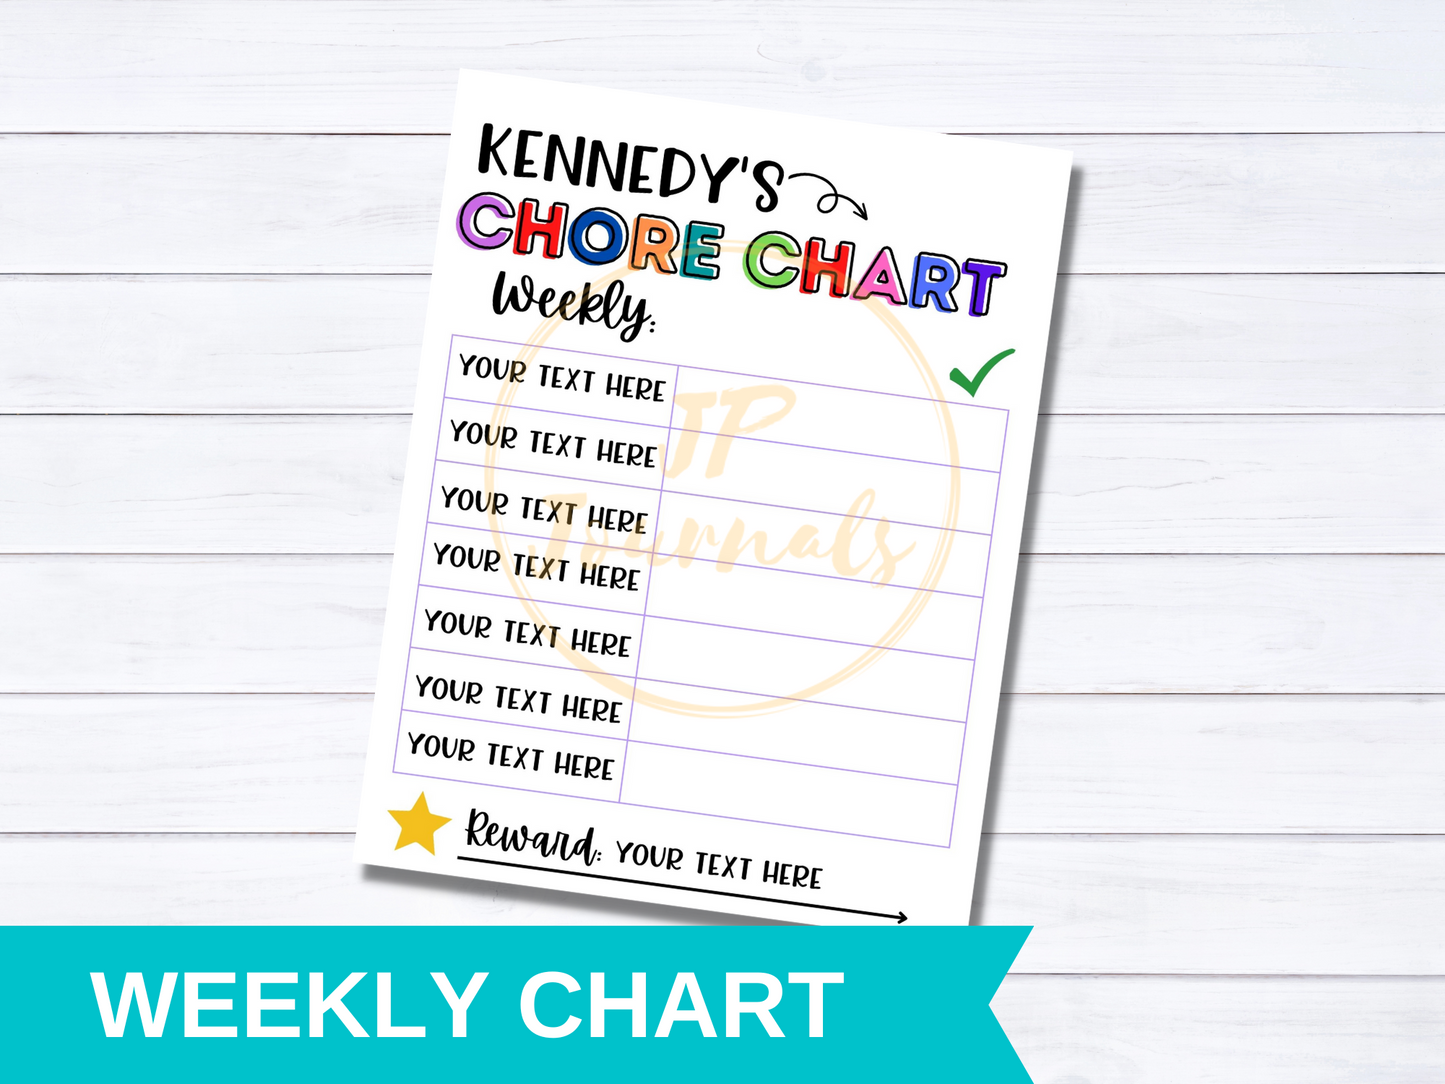 Chore Chart Template, Editable and Printable Daily and Weekly Chore Chart with Reward